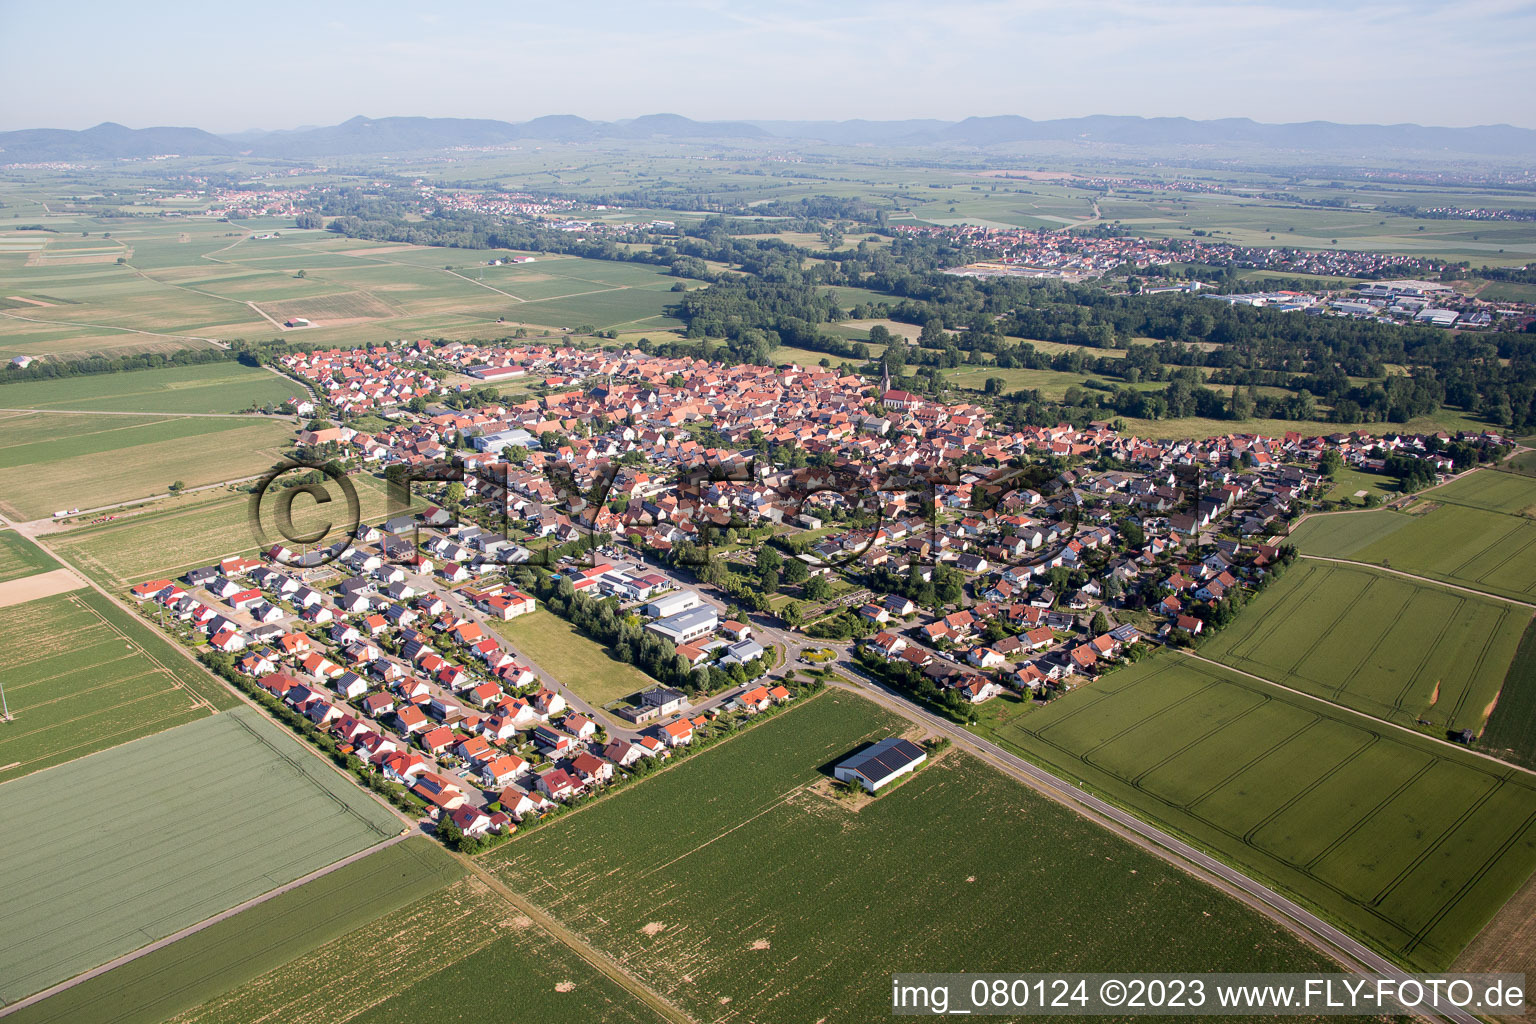 Steinweiler in the state Rhineland-Palatinate, Germany out of the air